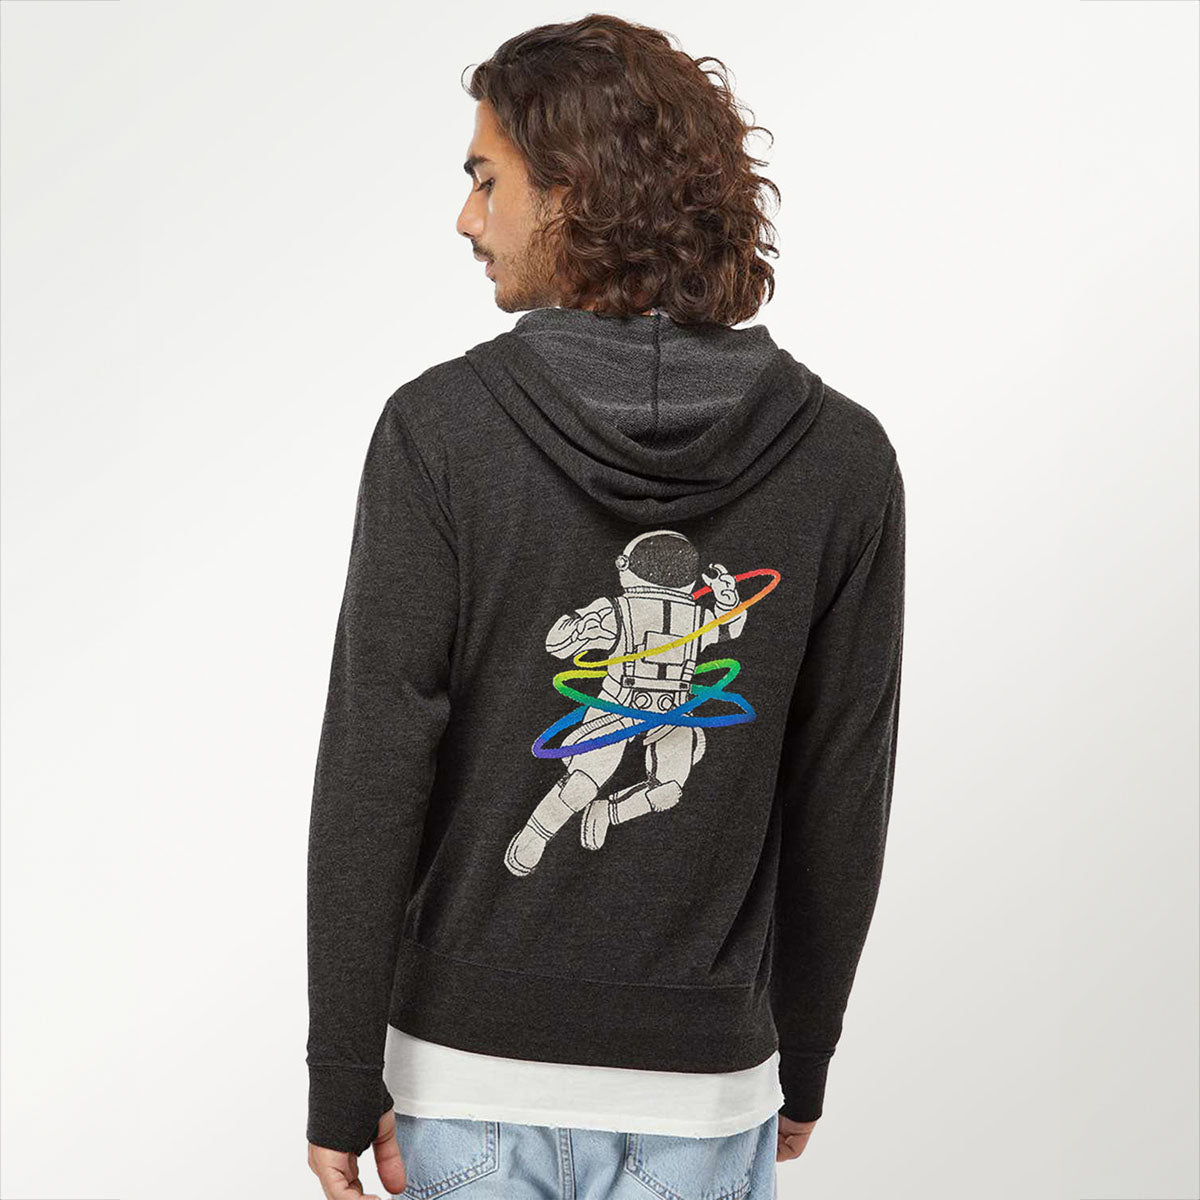 a photo of the back of a brown haired man wearing a dark heather grey hooded sweatshirt featuring a rainbow gay astronaut graphic